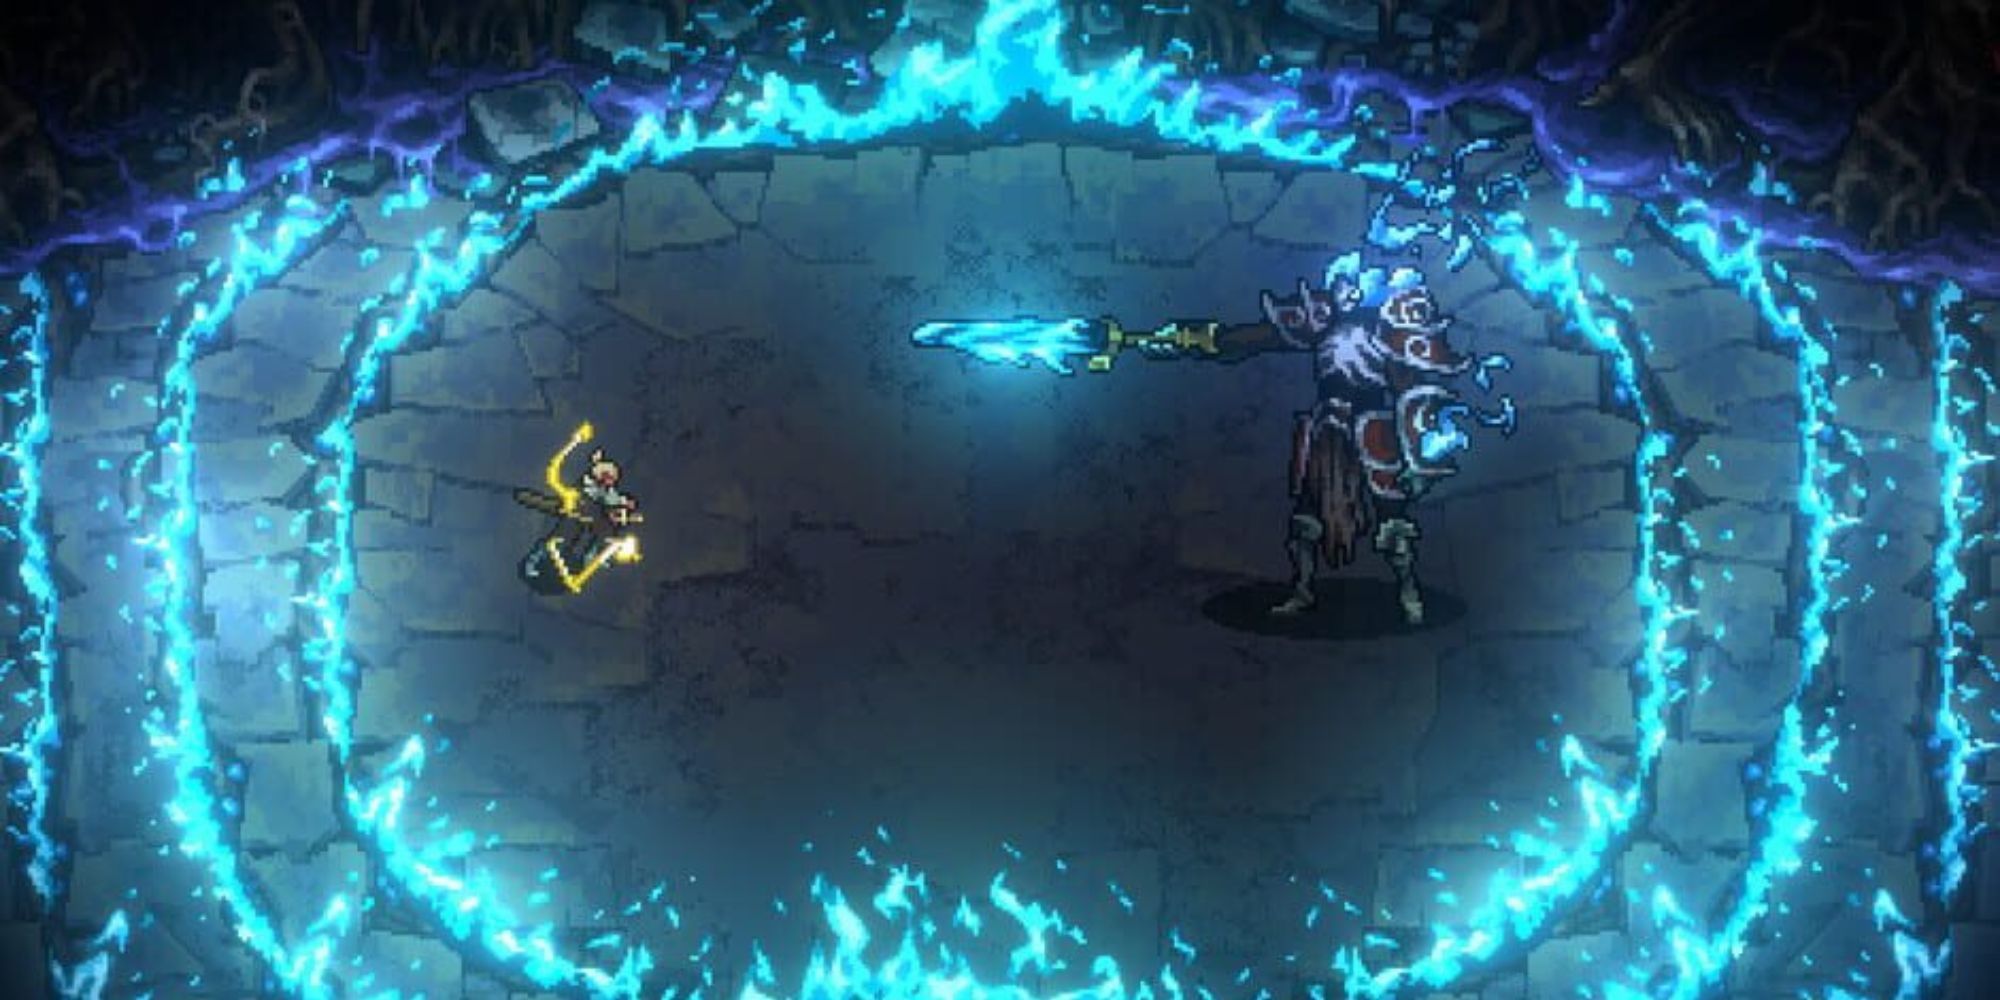 The Hero faces off a large opponent surrounded in flame